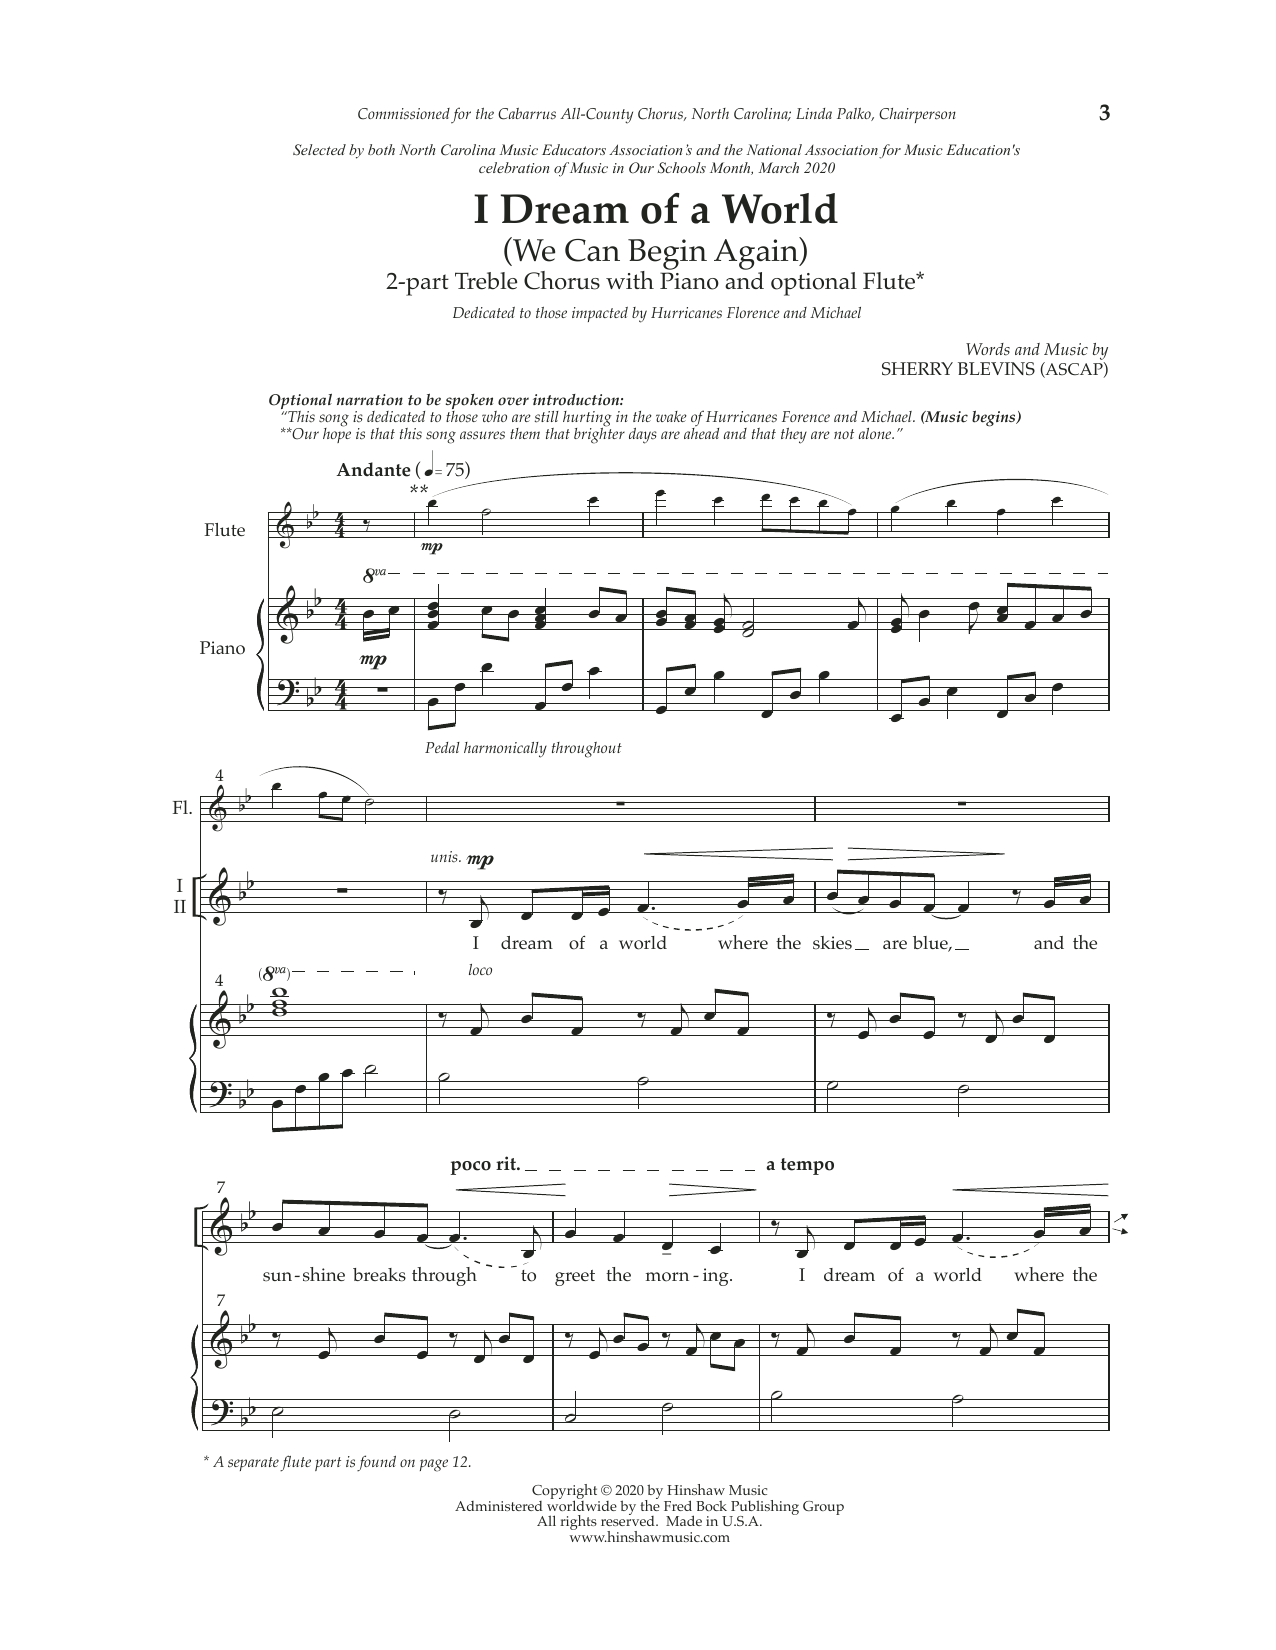 Download Sherry Blevins I Dream of a World Sheet Music